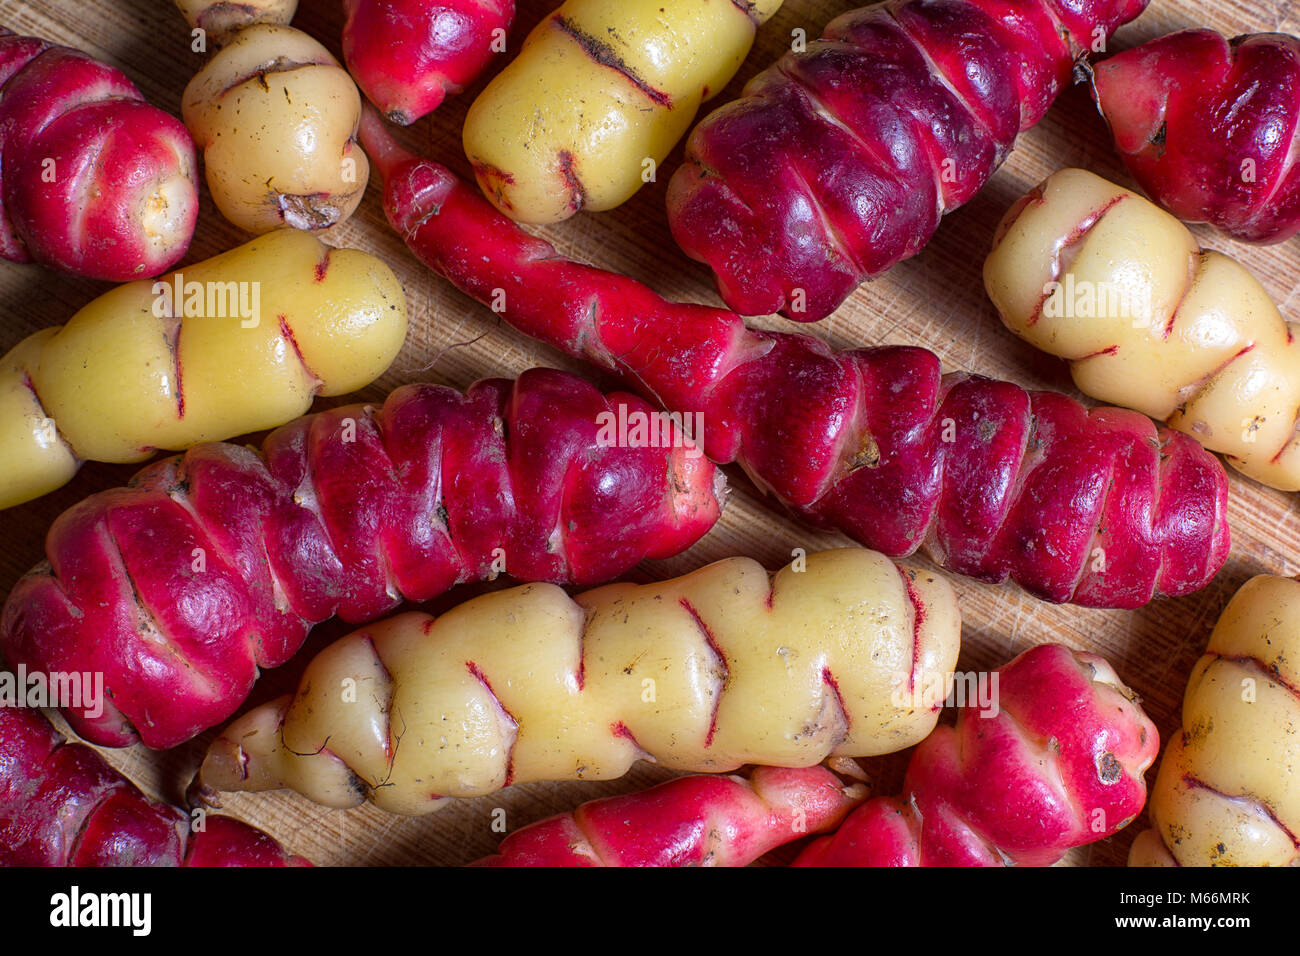 Colorful red and yellow roots of oca tuber Oxalis tuberosa on wooden cutting board in Ecuador Stock Photo